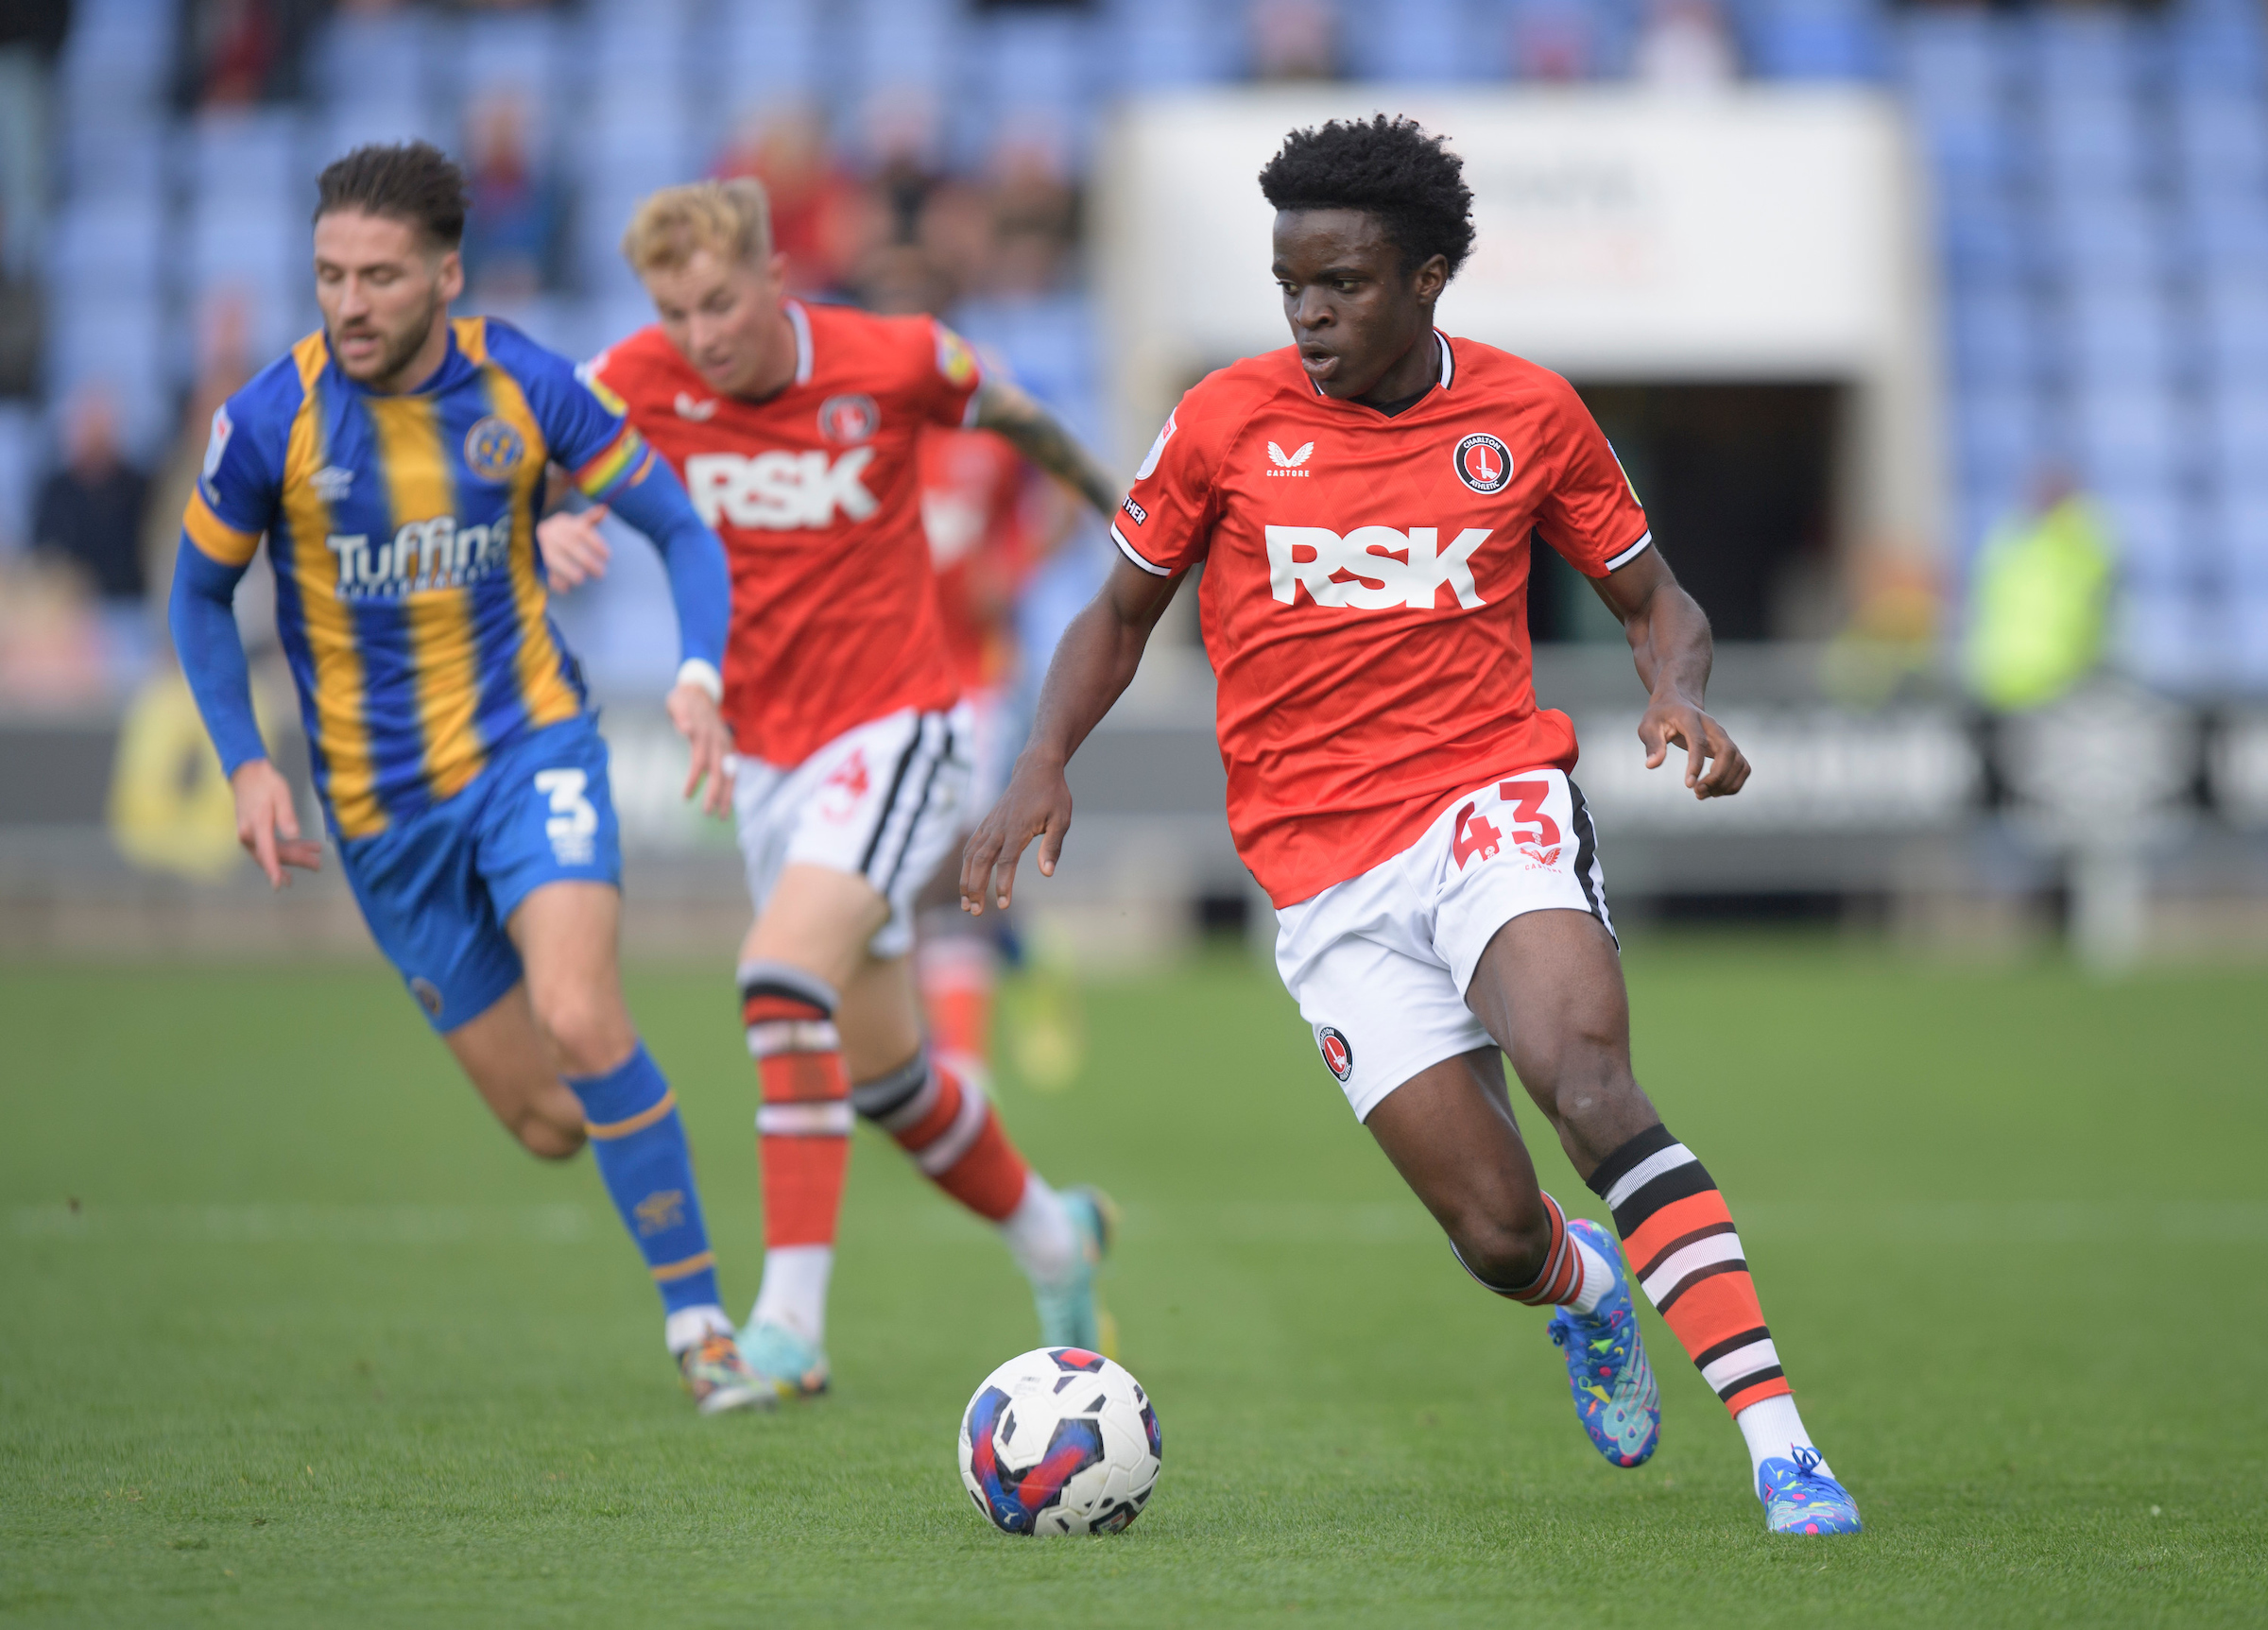 Tyreece Campbell dribbling the ball against Shrewsbury Town